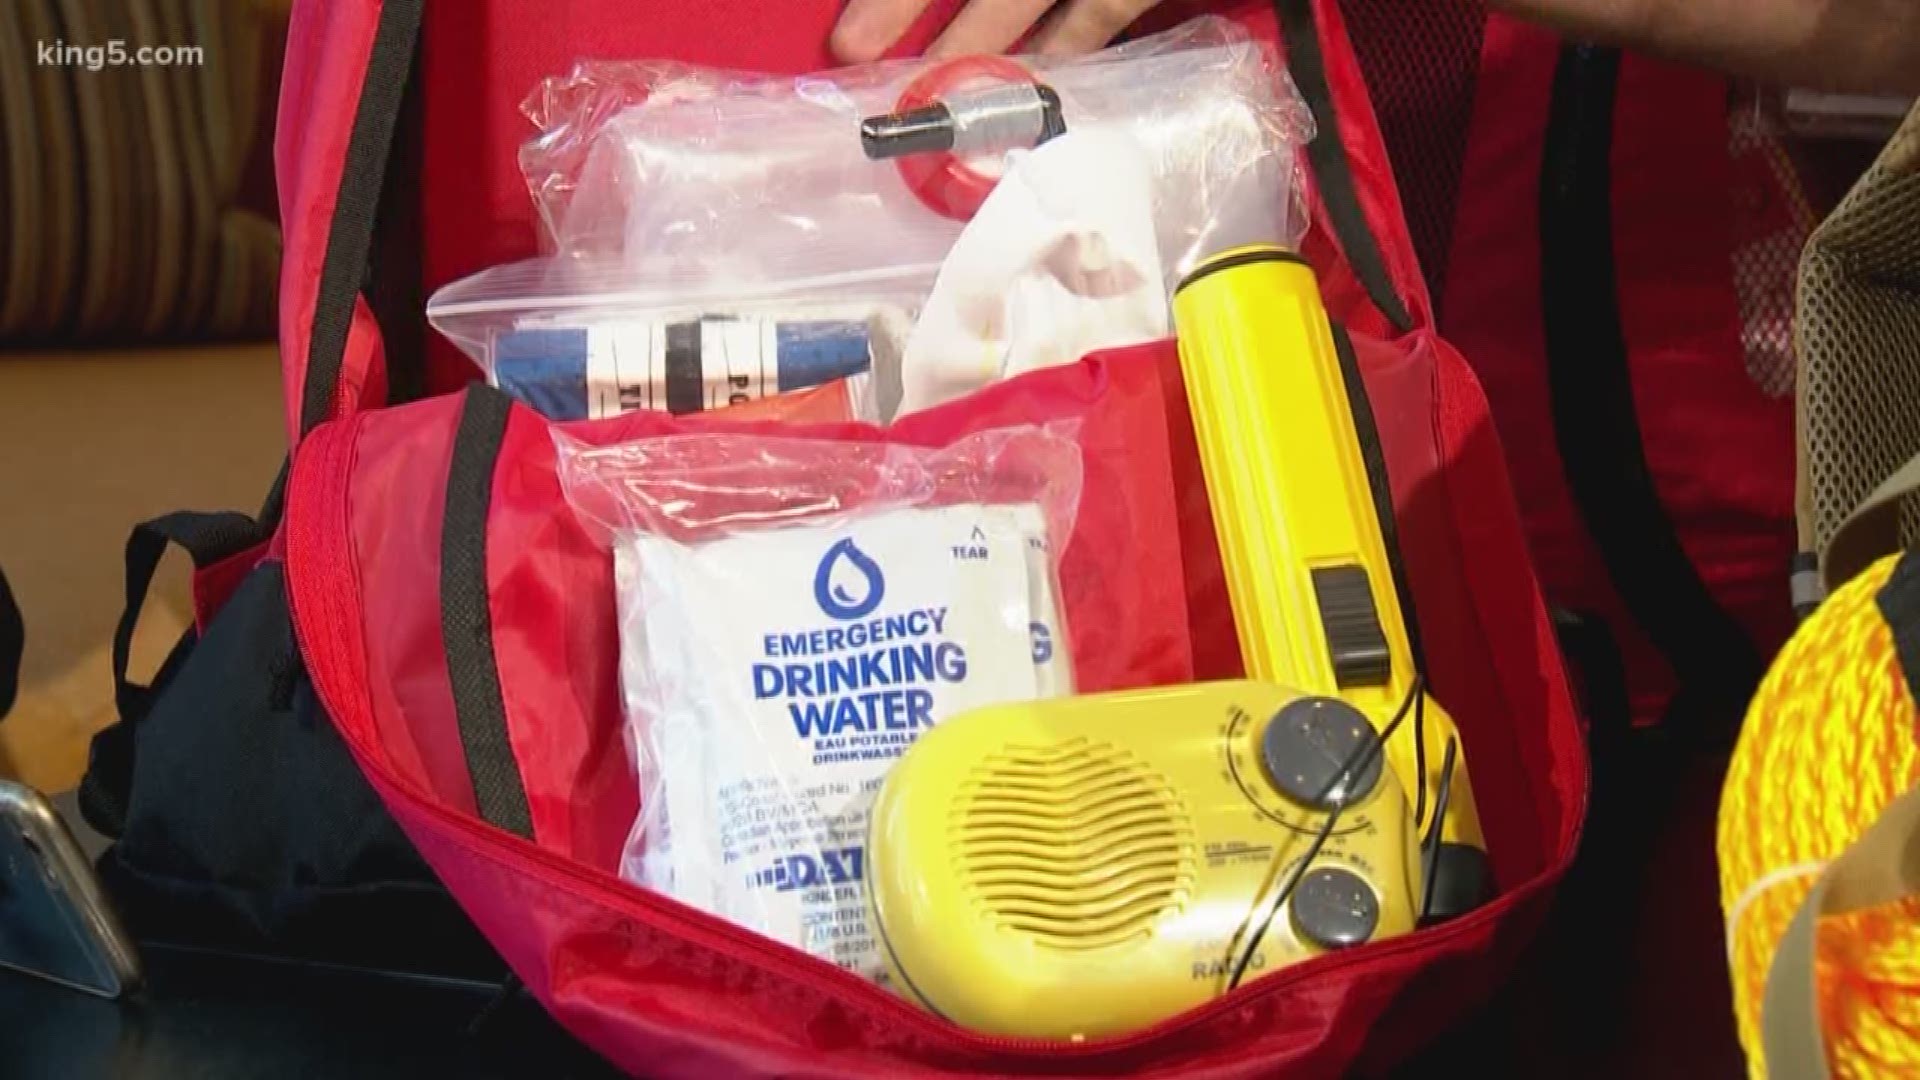 Some things you may need in the event of an emergency.